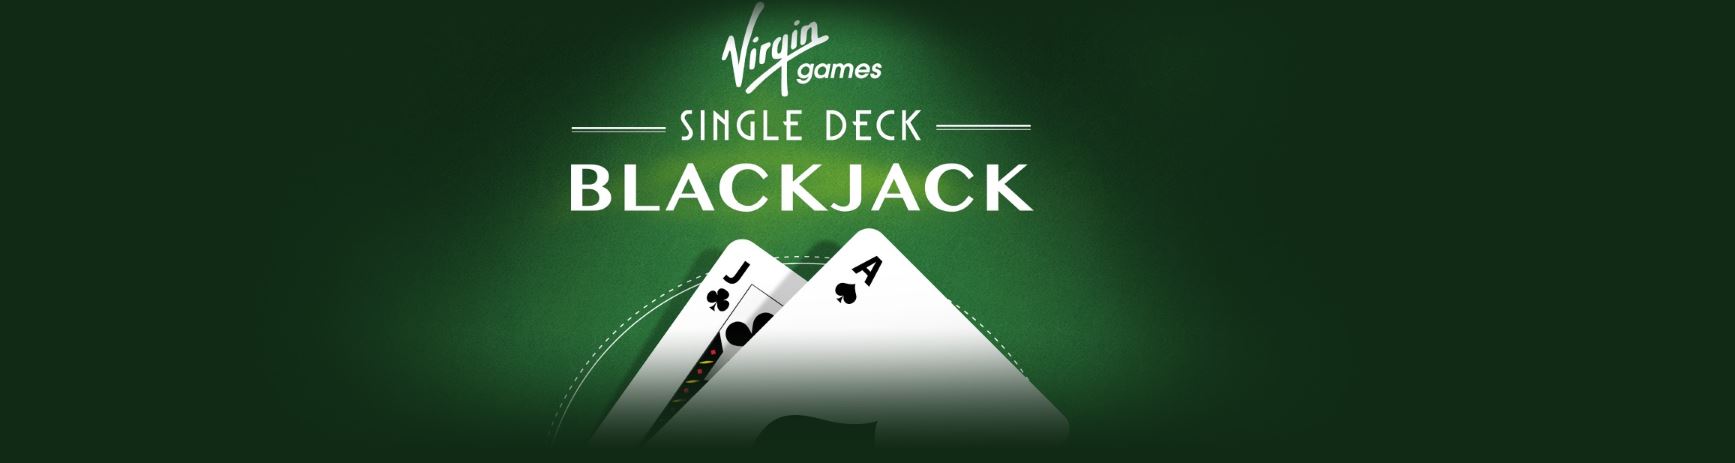 Learning to play blackjack is easy with strategies.